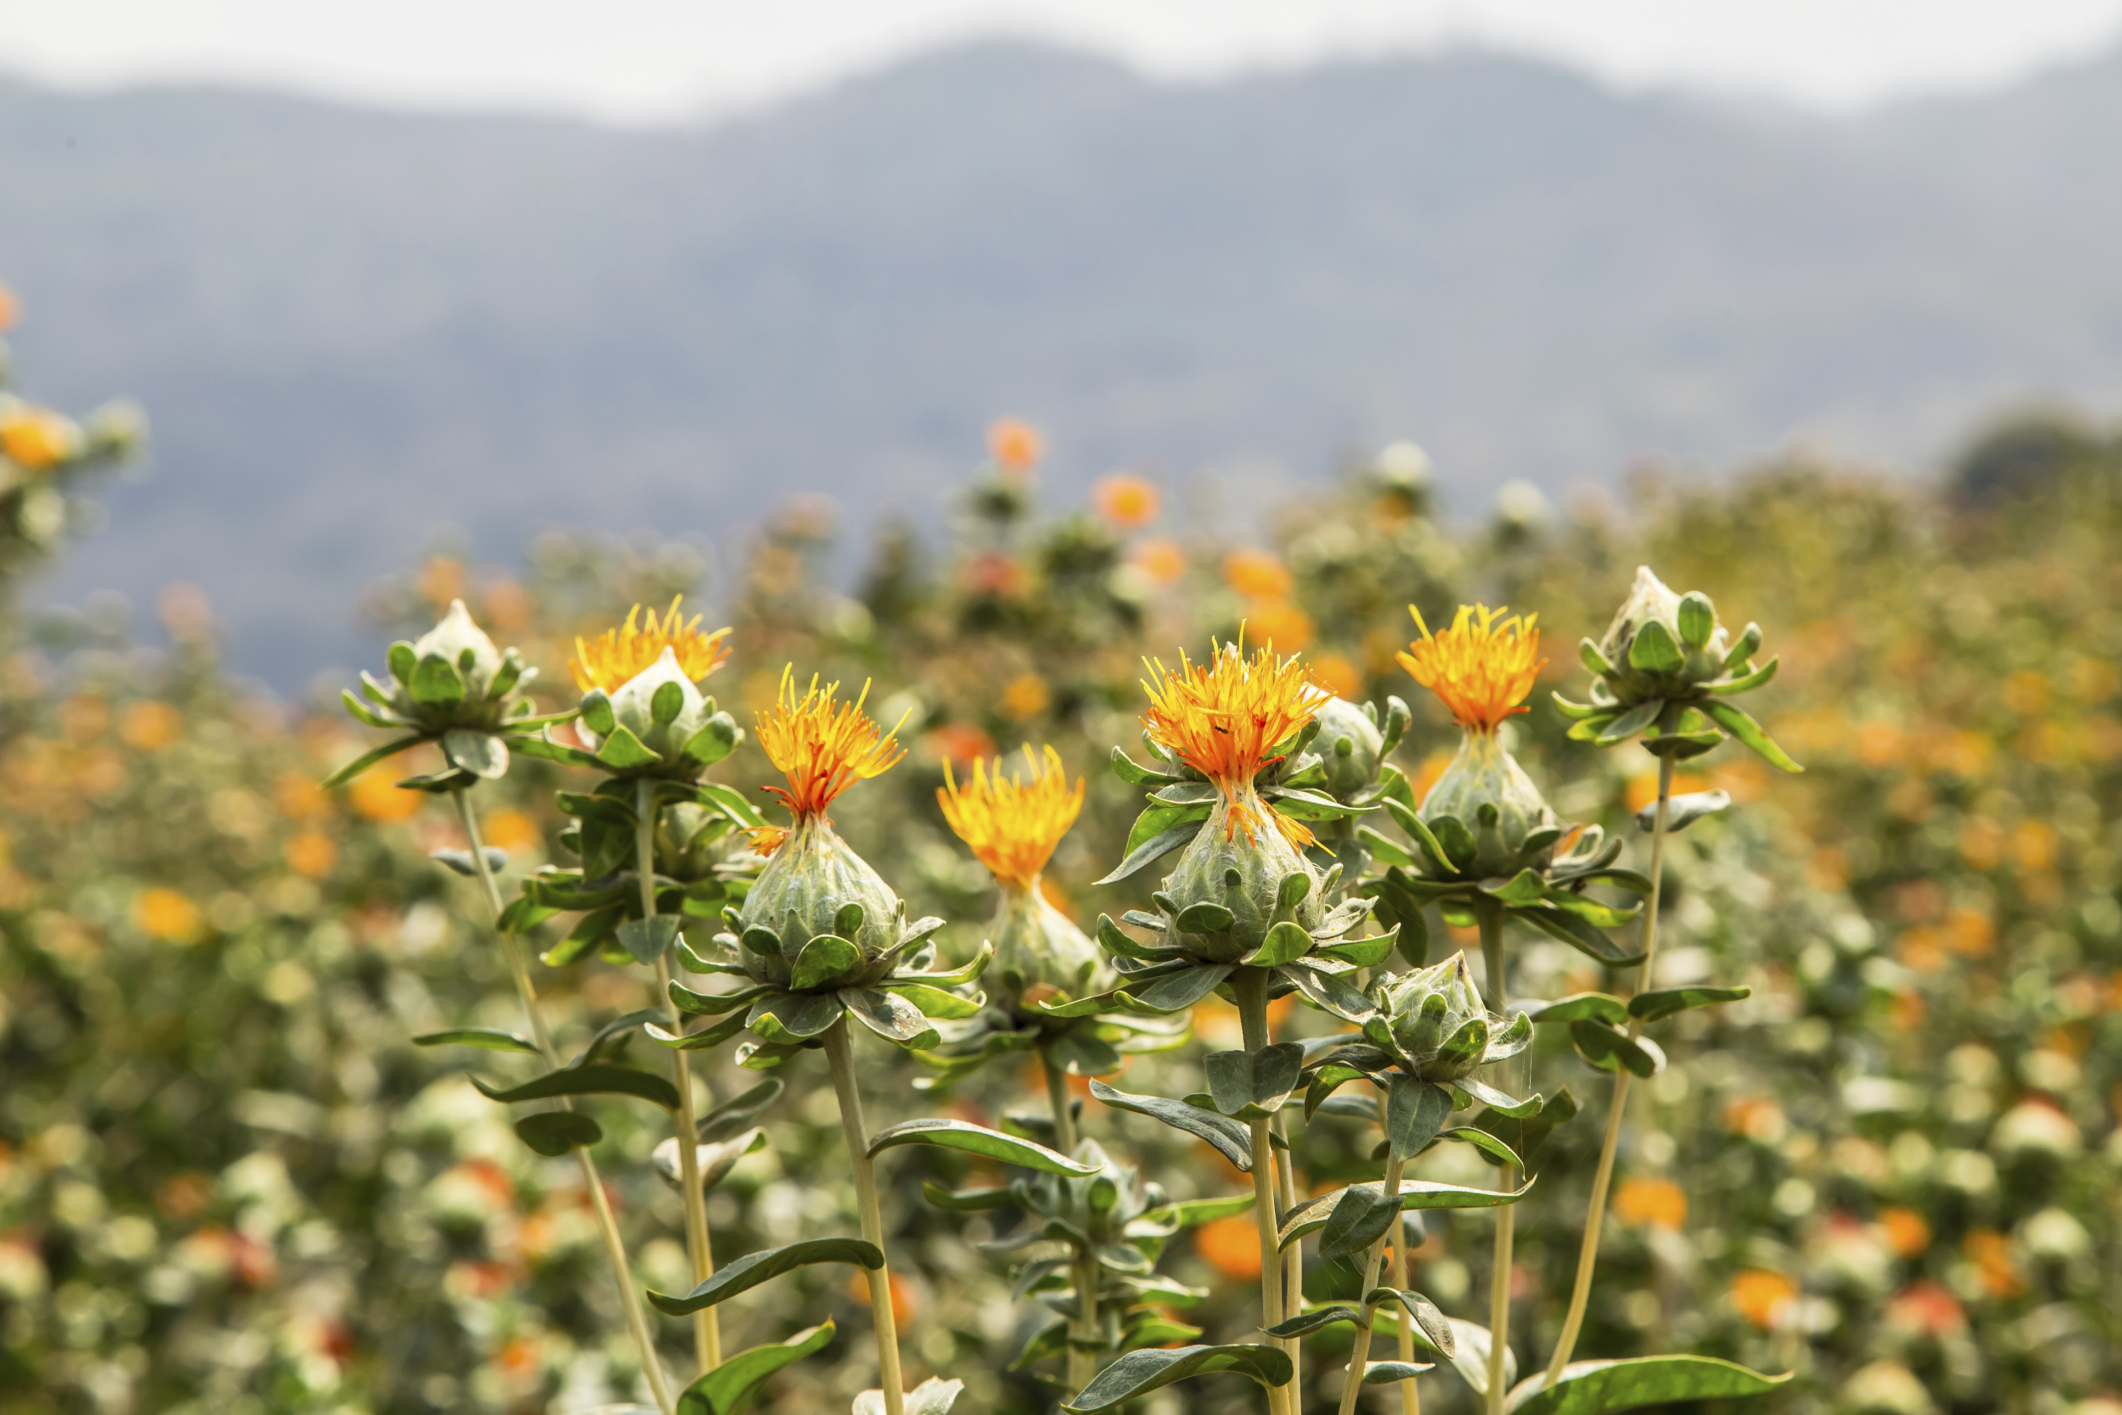 Image of Sunflowers and safflower